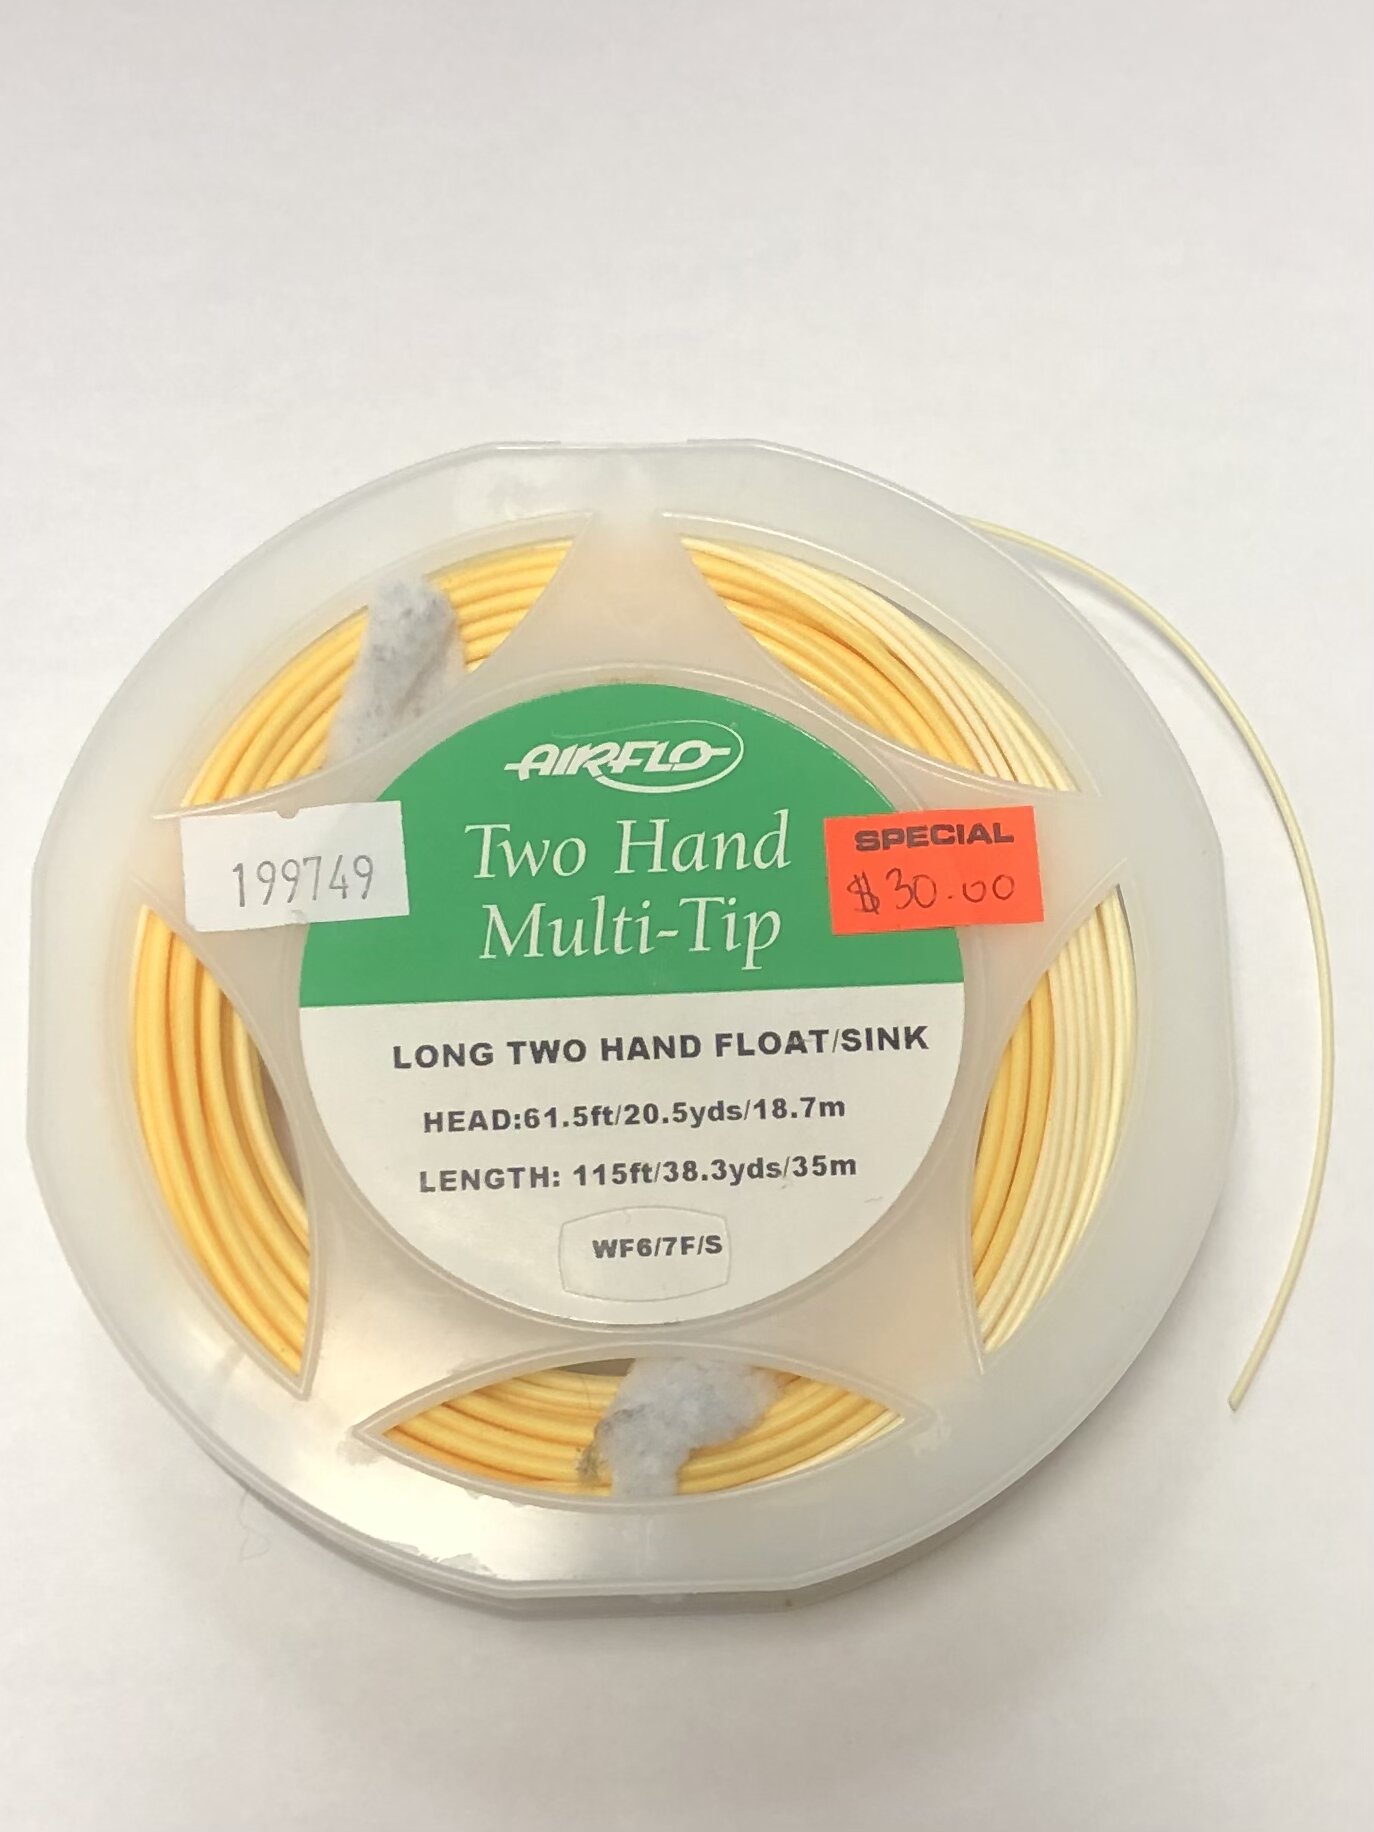 AIRFLO POLYFUSE DELTA FLOATING WF6/7F FLY FISHING LINE 2 LINES PER ORDER 